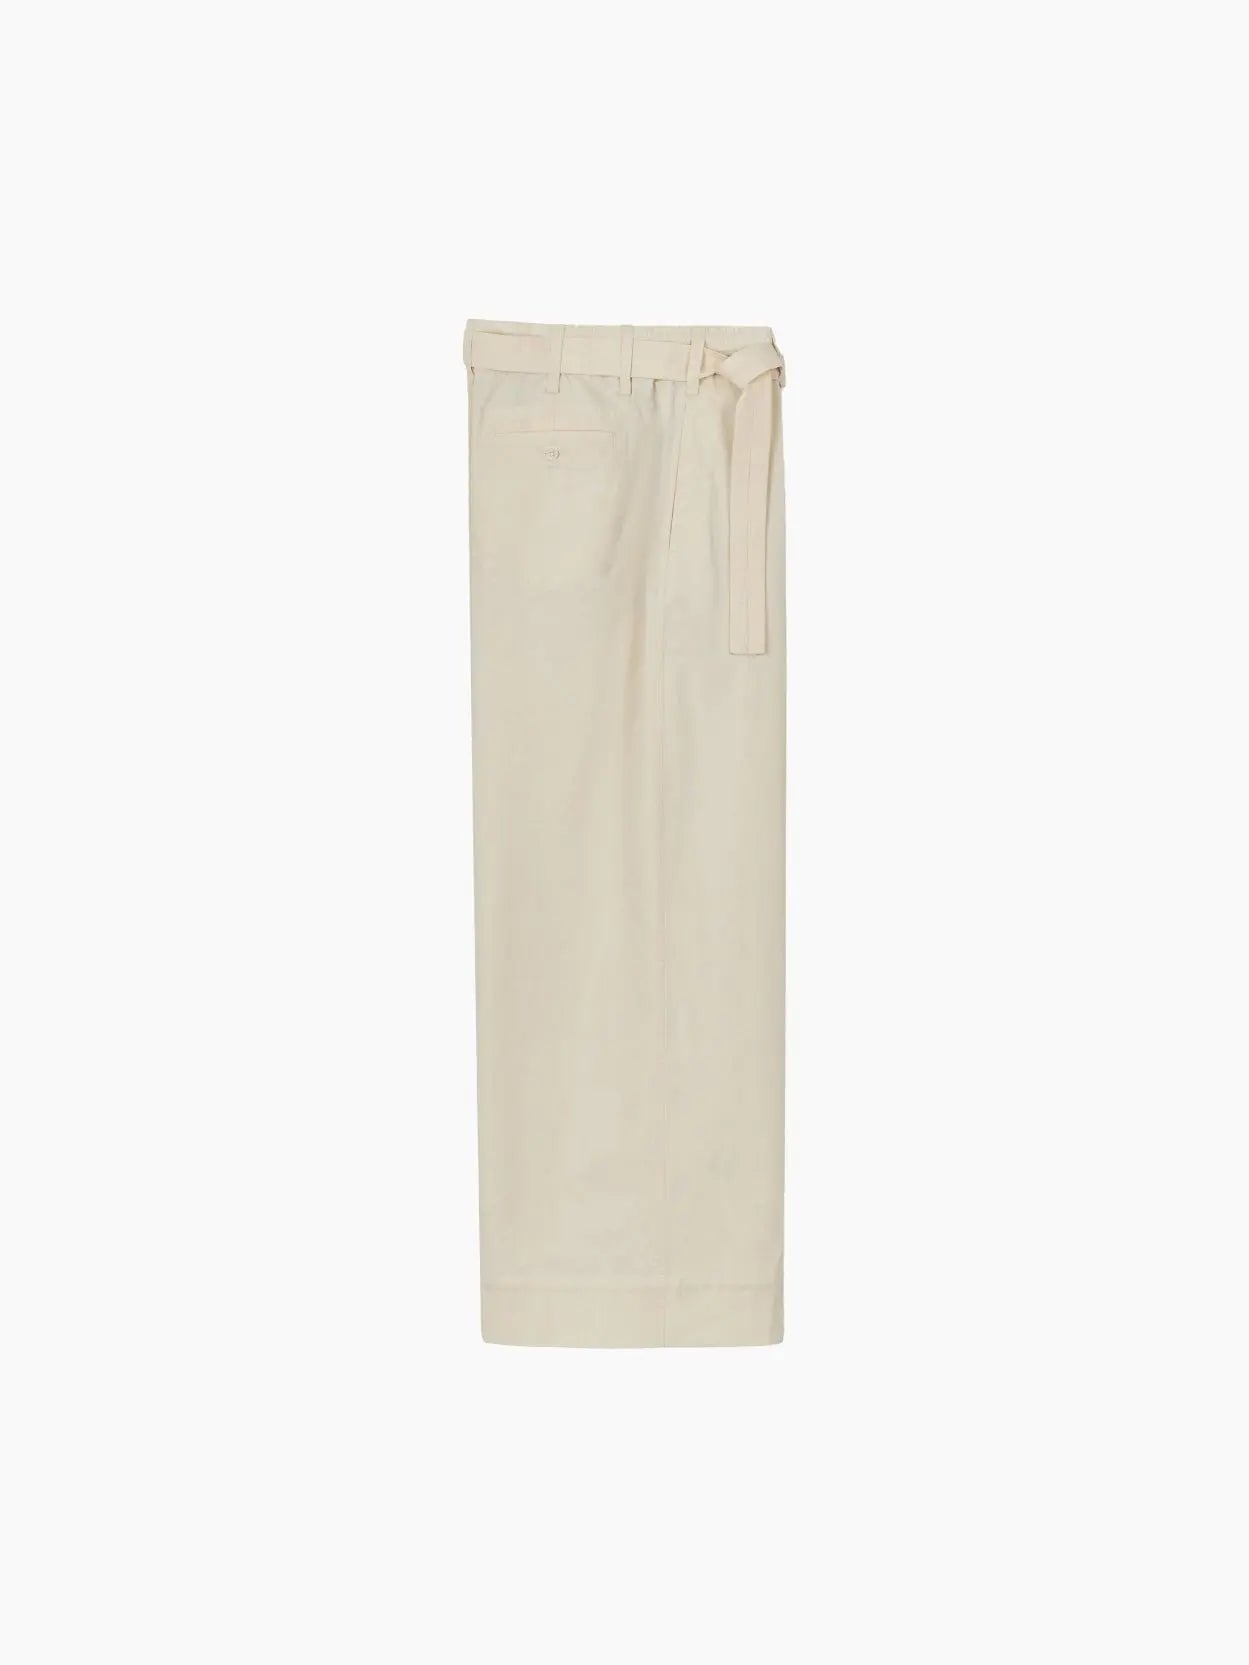 A pair of Rachel Pants Natural by Jan Machenhauer with a fabric belt at the waist, shown against a plain white background. Available exclusively at Bassalstore in Barcelona, the pants feature a minimalist design with subtle pleats and clean lines.